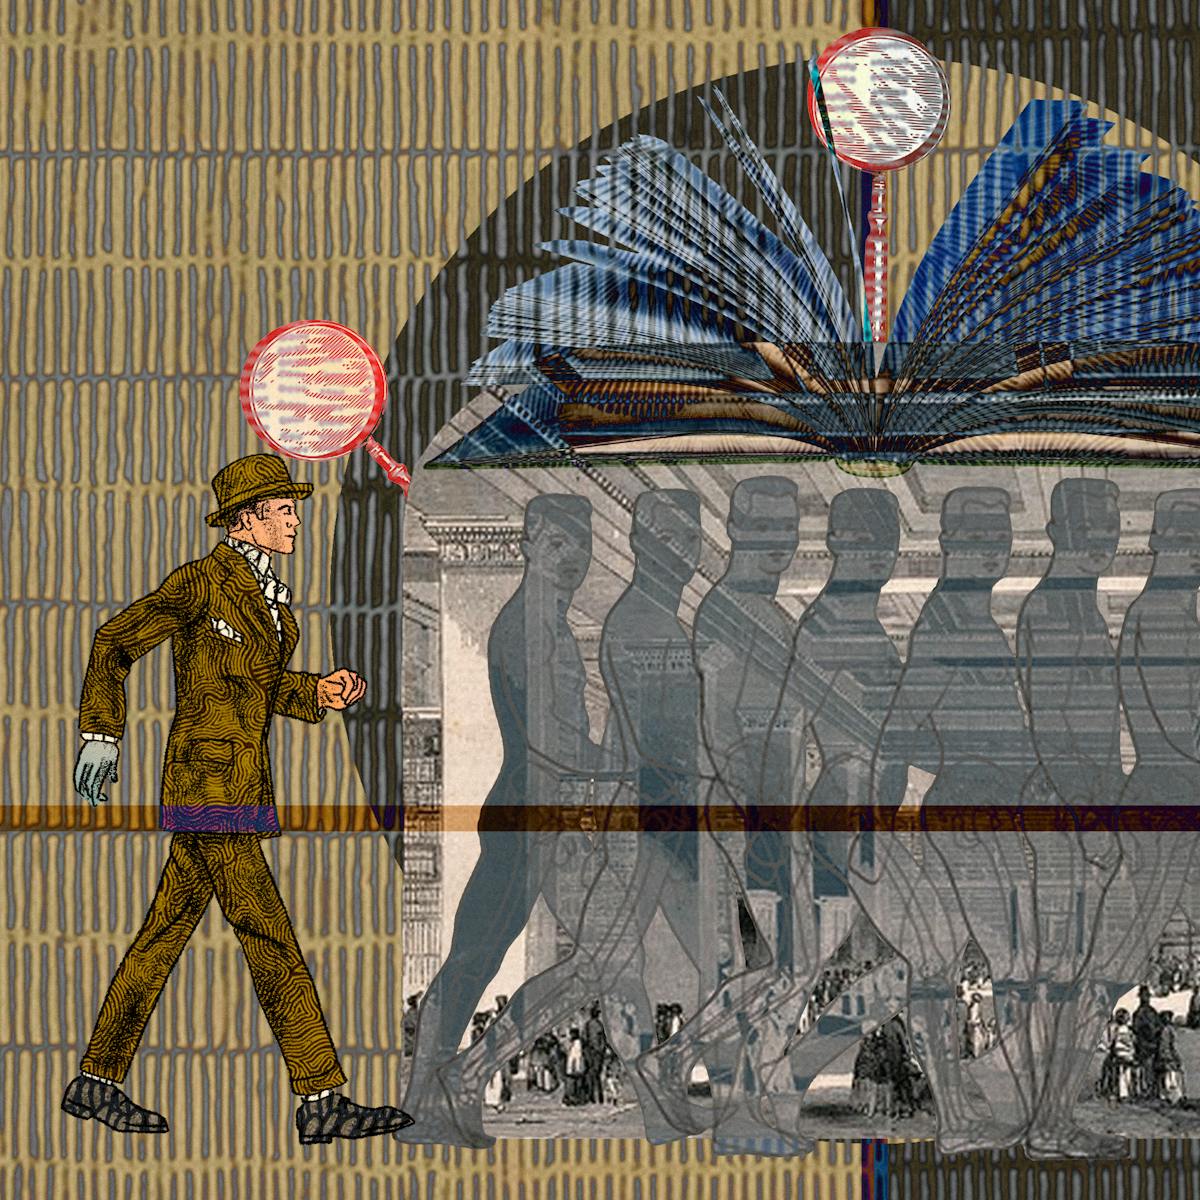 An abstract digital illustration depicting a young Victorian man walking into the entrance of a library and being transformed into an ill looking, tired and diseased old man. In the background is an archive image of a place of learning, decorated with magnifying glasses as ornaments and open book forming an arch overhead.